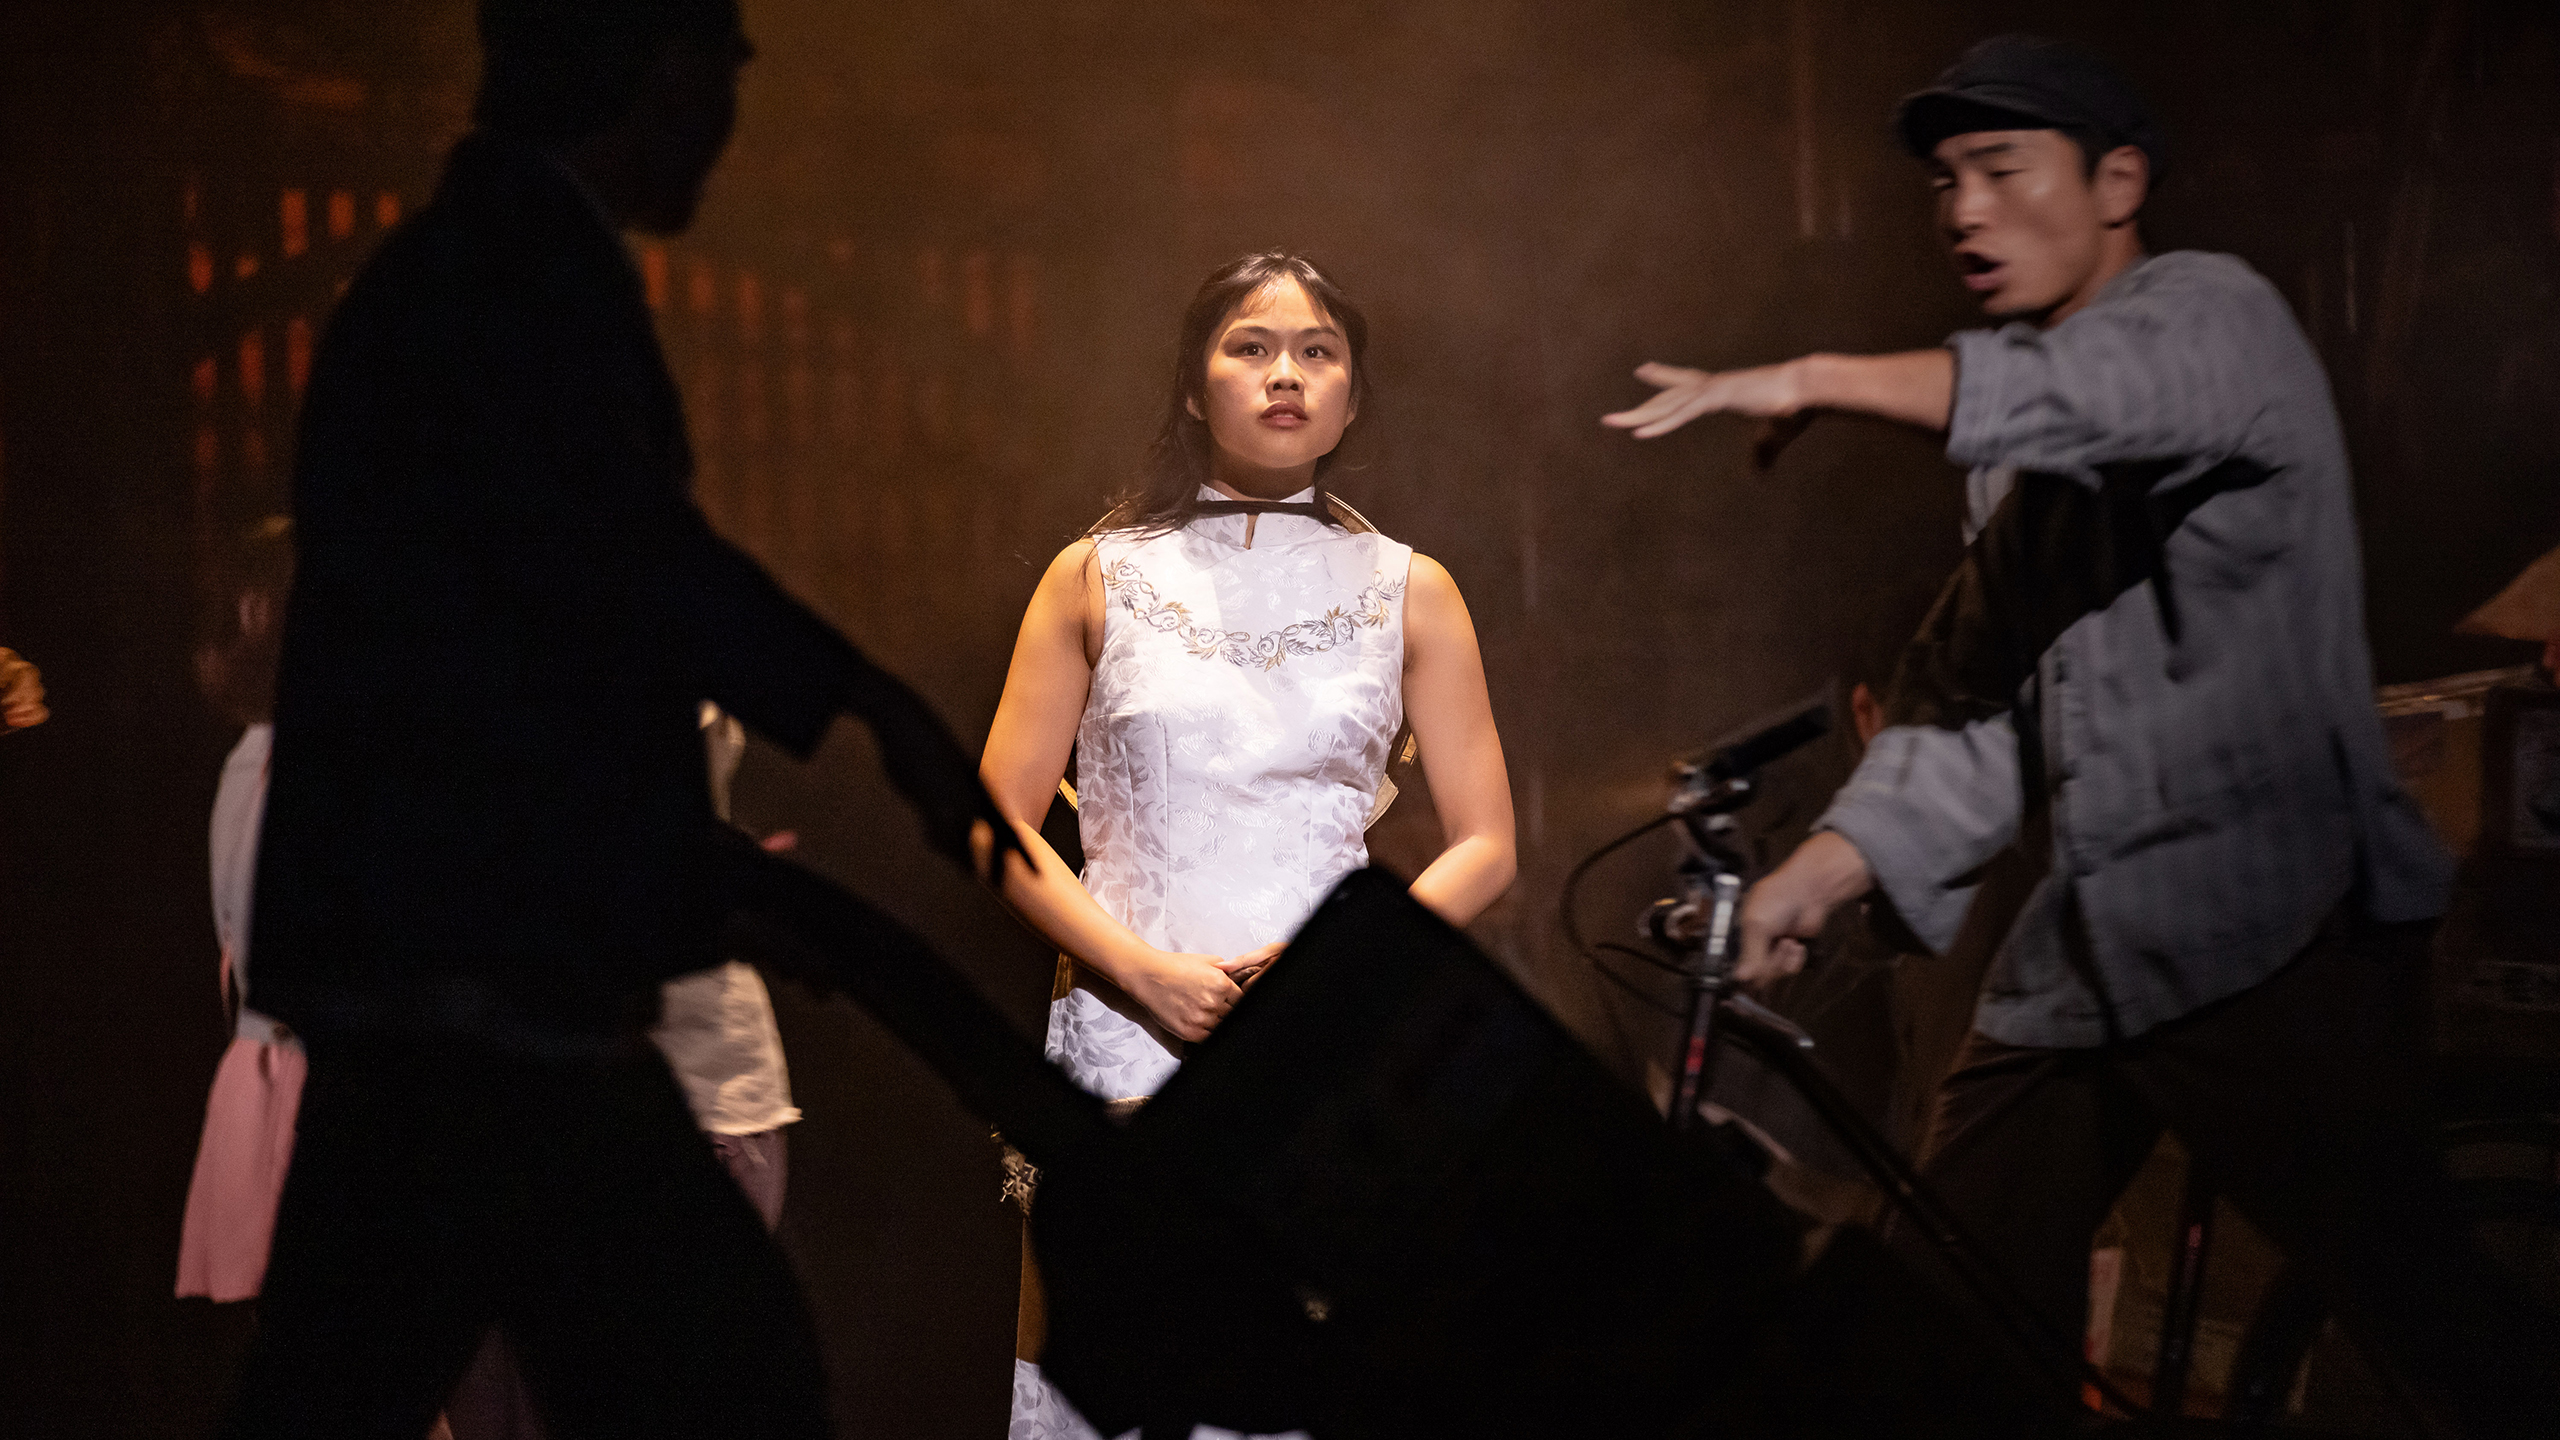 An Asian woman wearing a traditional white dress stands centre stage while cast members move around her.